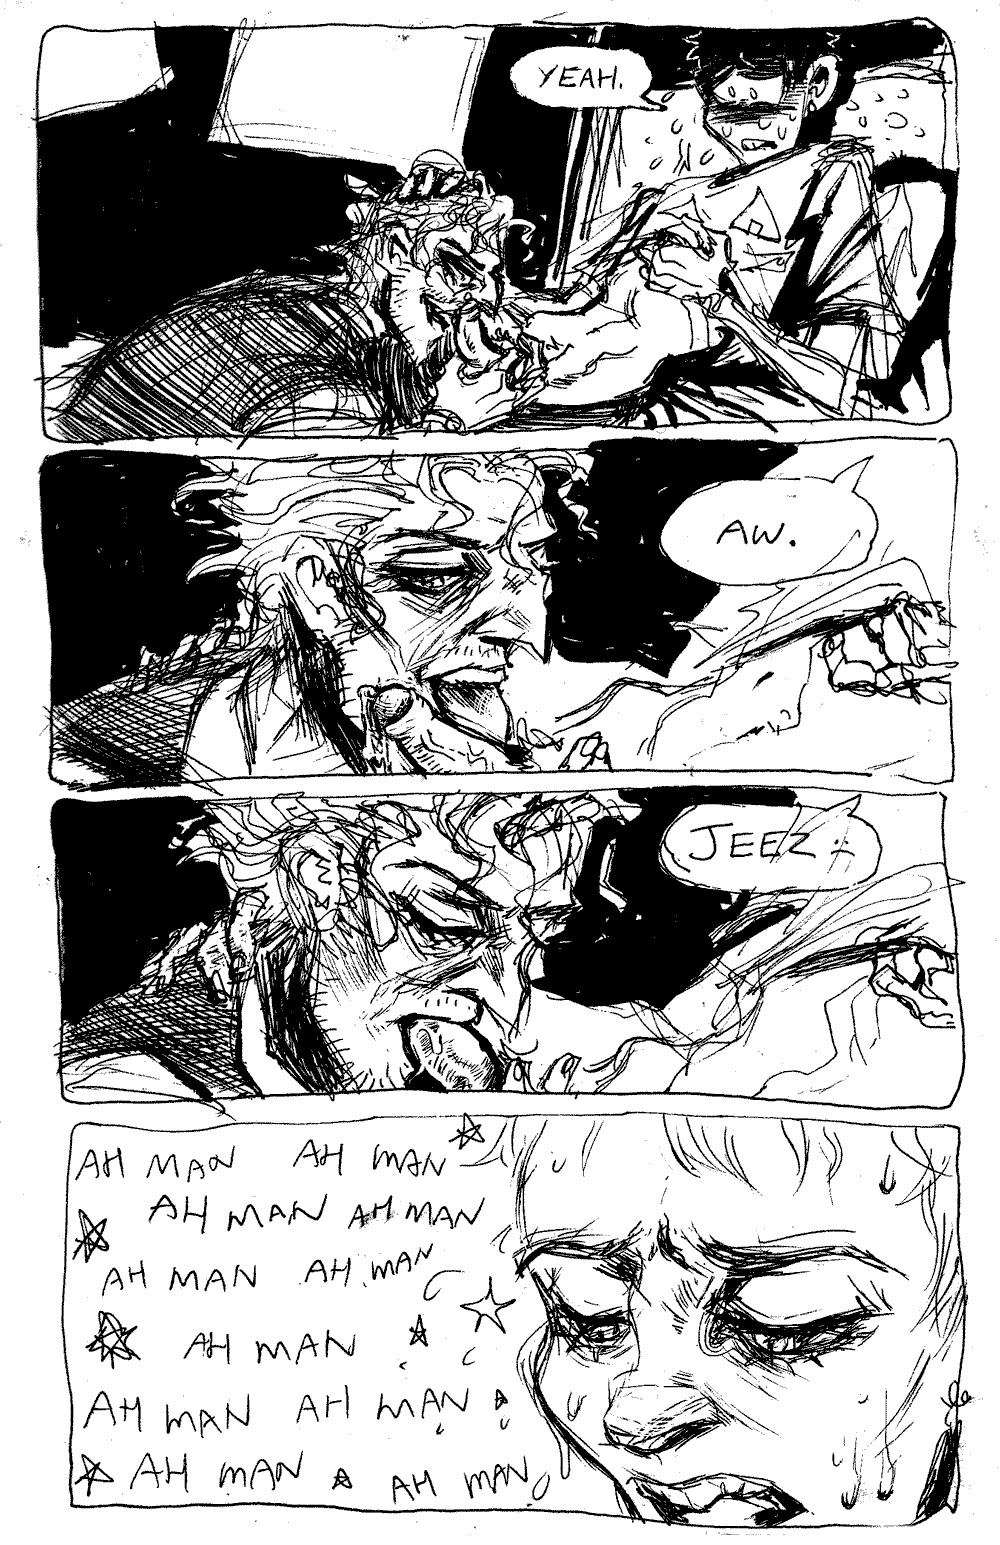 Page4 - Small man replies 'yeah..' with a bamboozled expression.  He's surprised he made it this far!  He exclaims 'aw jeez' as he recieves amazing felattio from the older man.  The final panel zooms in on the small man's sweating face as he repeats 'ah man' with his eyes closed.